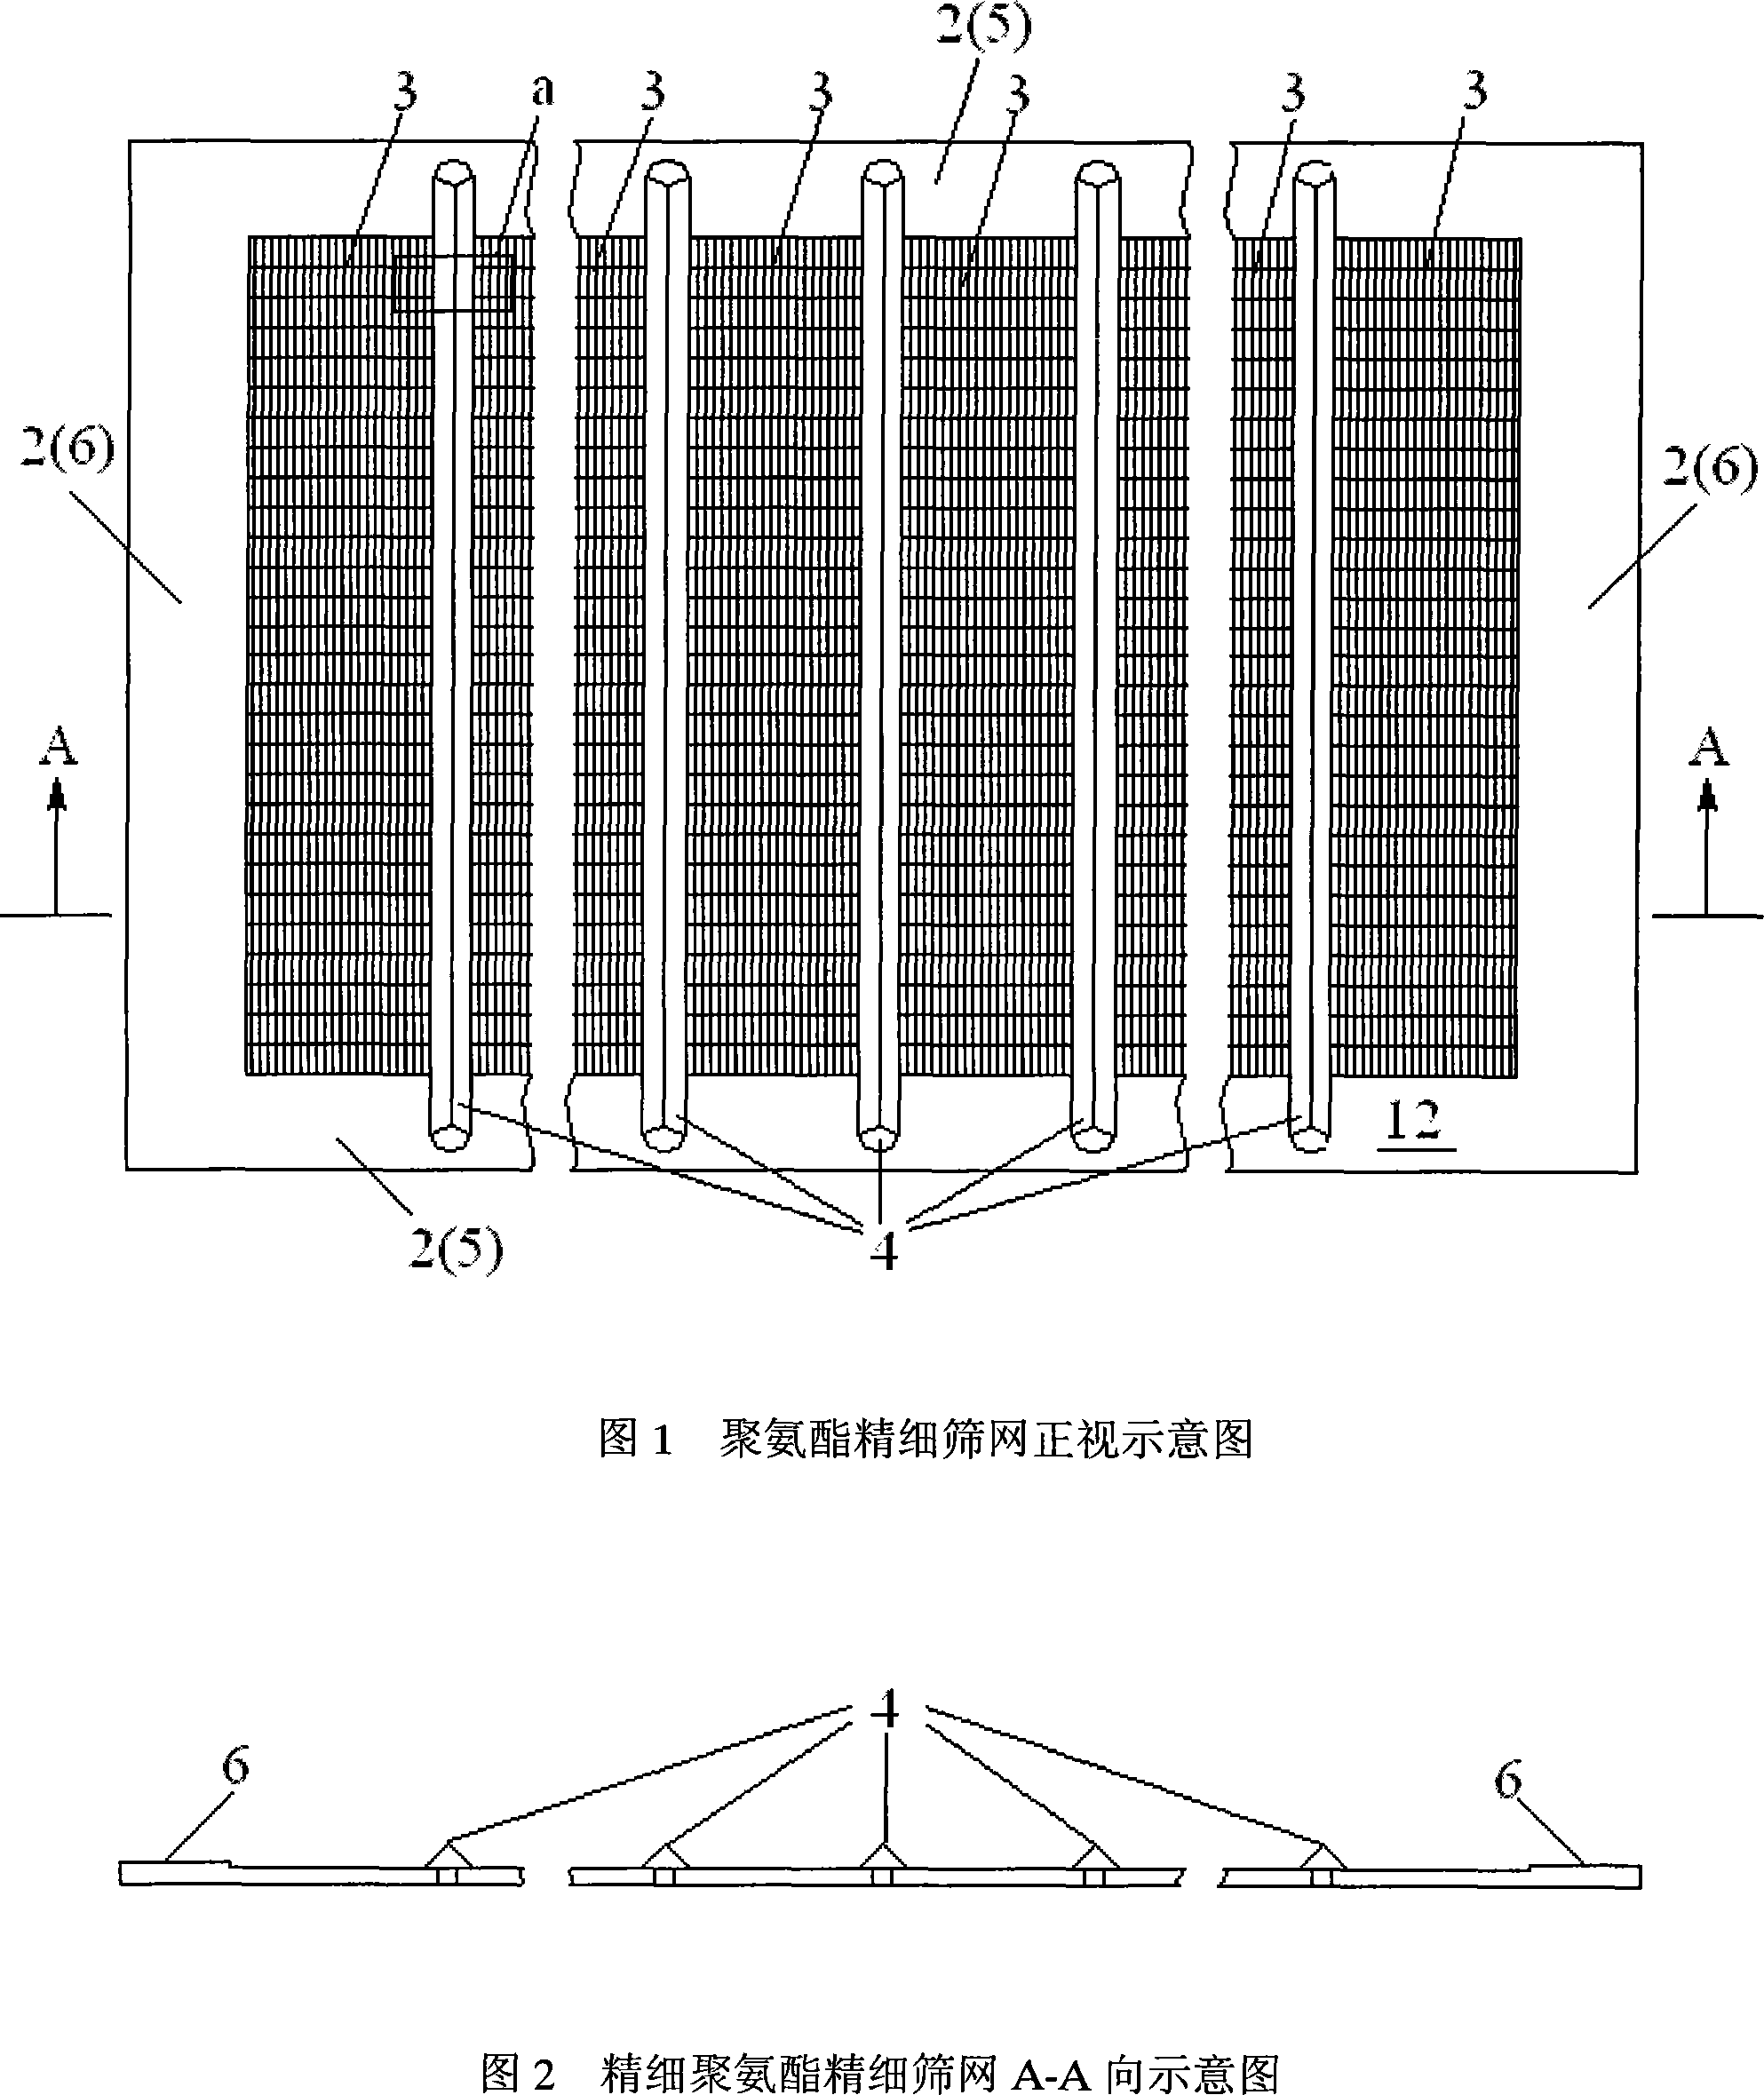 Fabric reinforced polyurethane fine sieve and its forming method